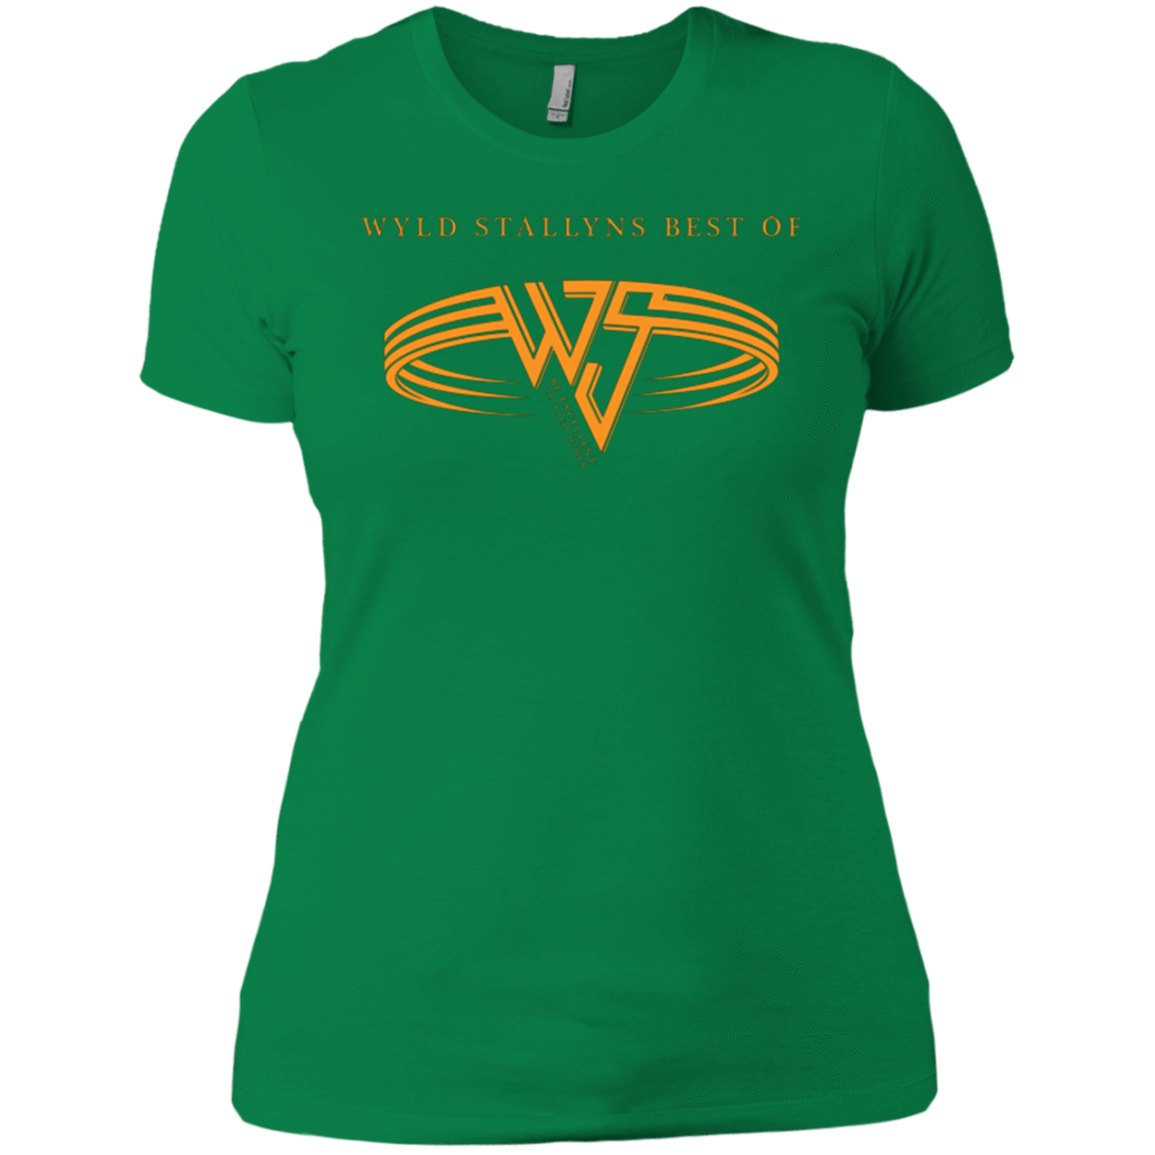 T-Shirts Kelly Green / X-Small Be Excellent To Each Other Women's Premium T-Shirt